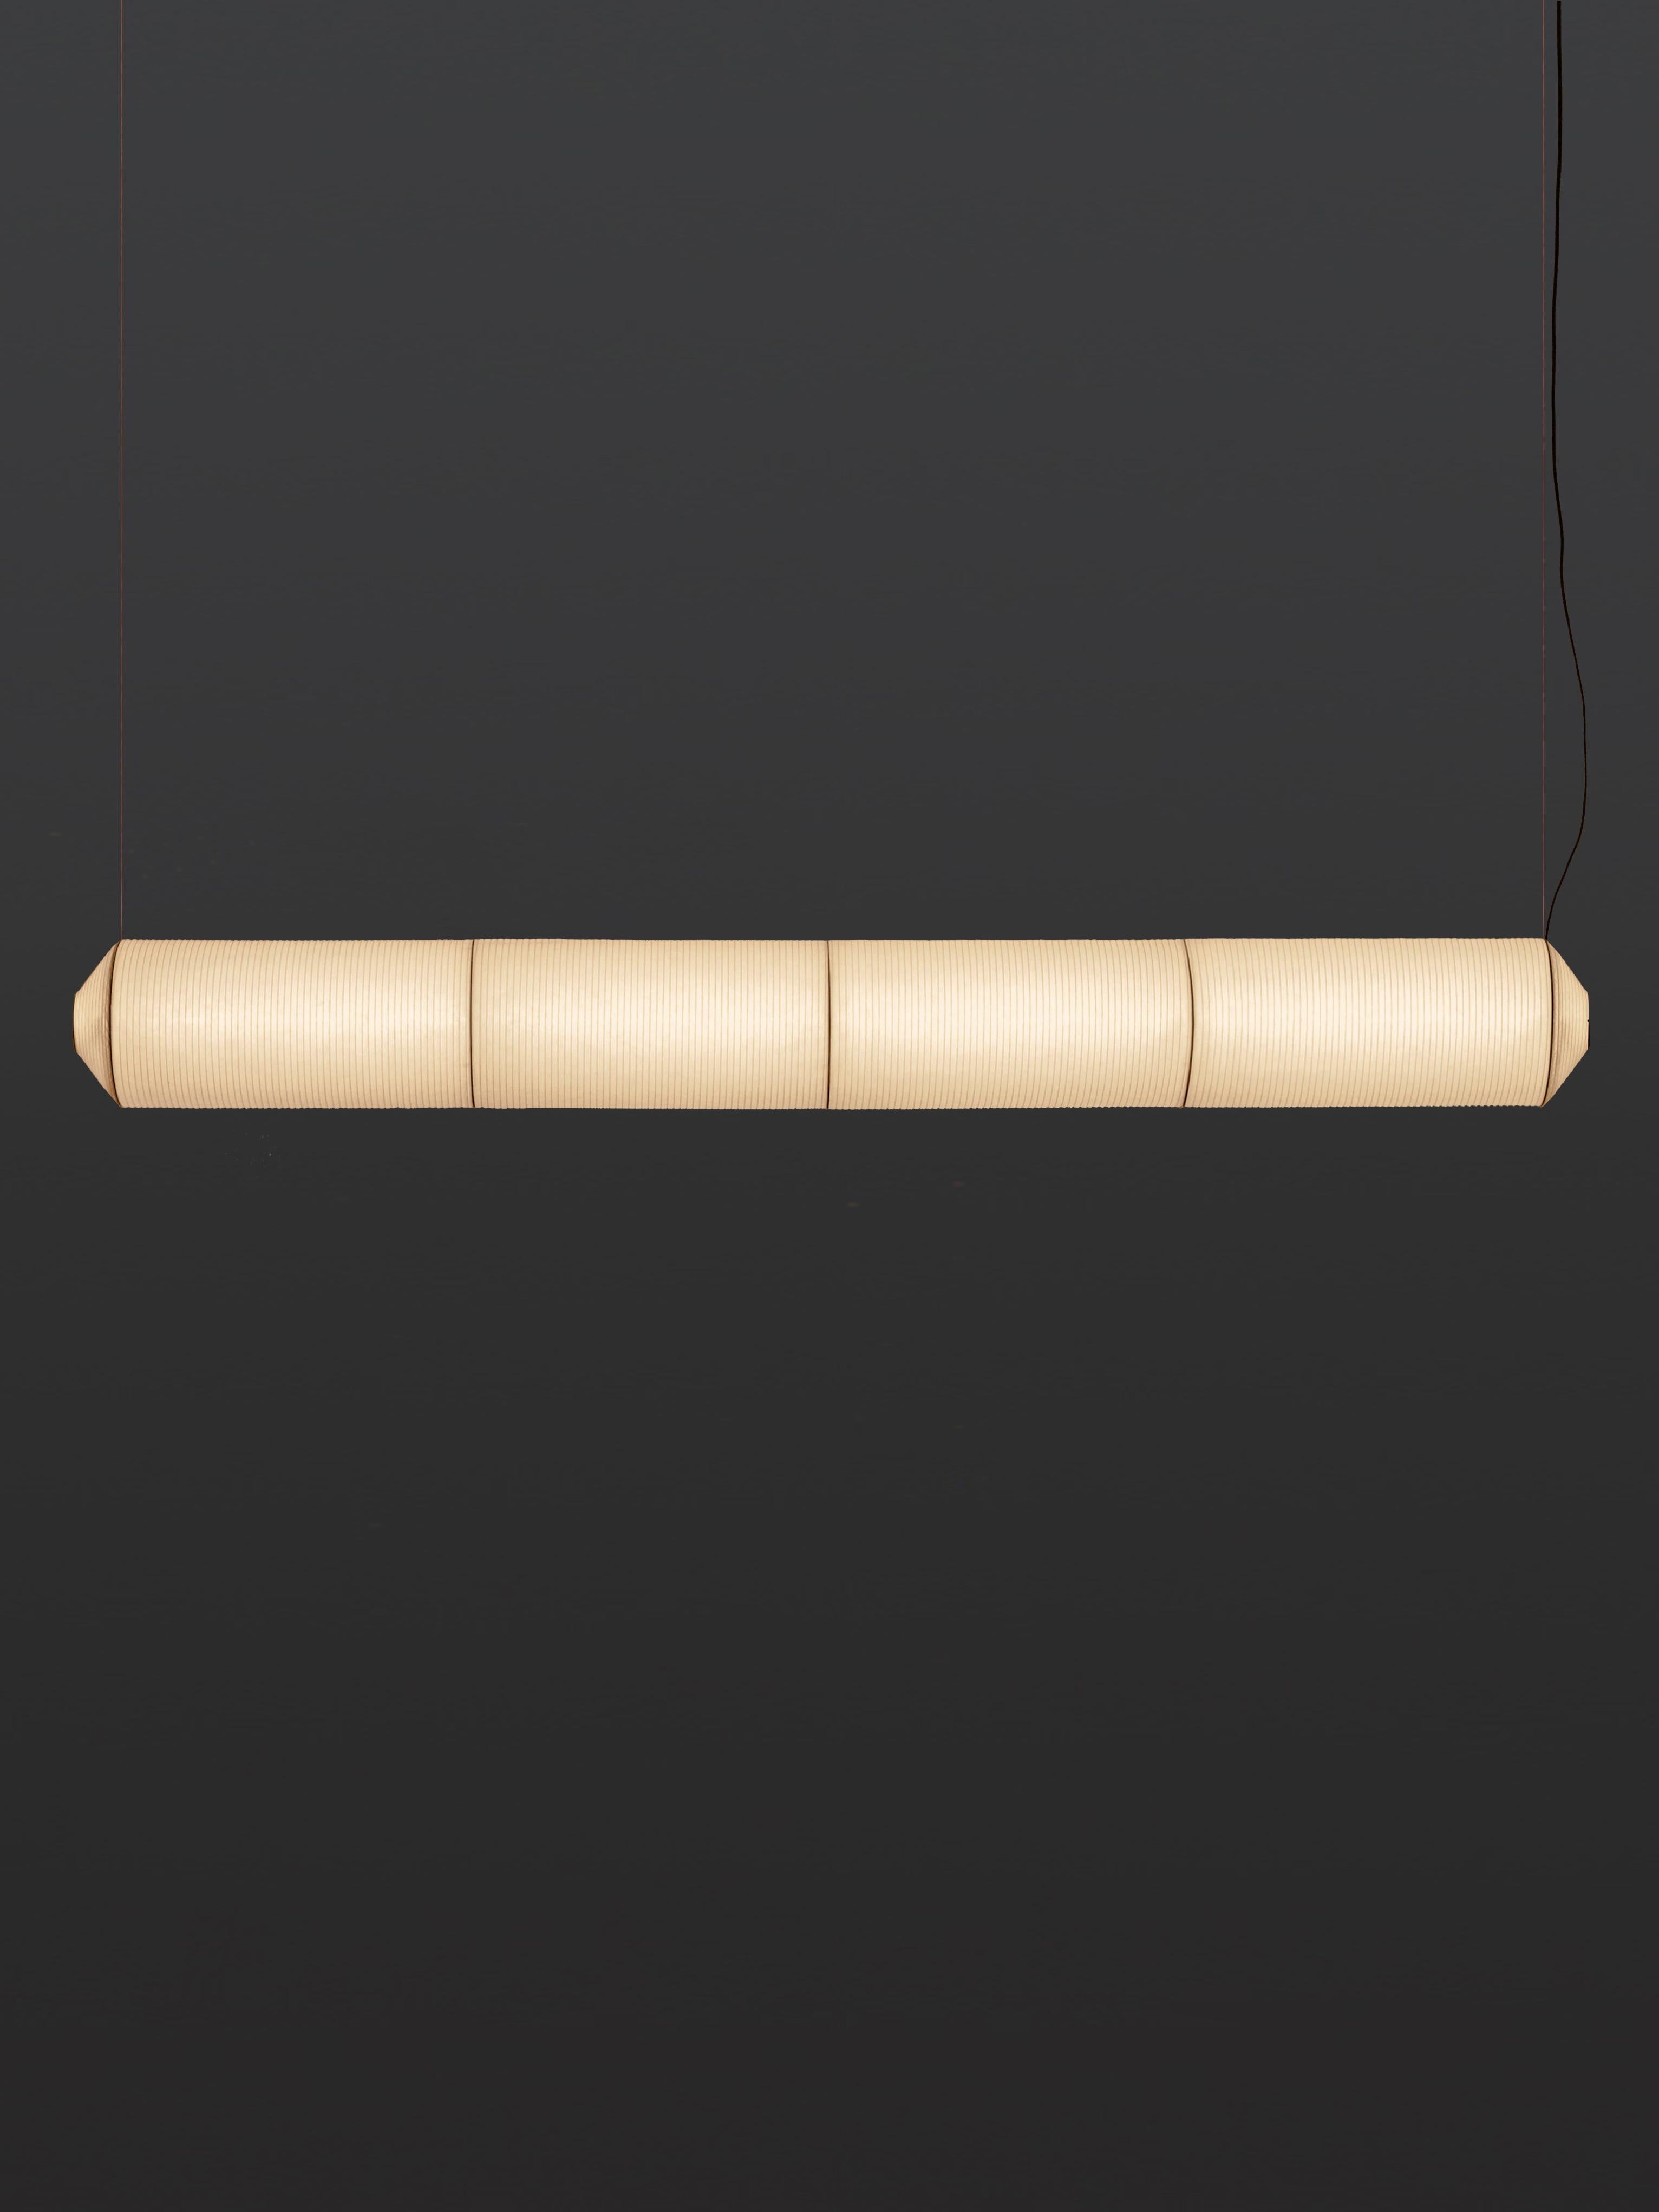 Tekiò horizontal P4 pendant lamp by Anthony Dickens.
Dimensions: D 25 x W 226 x H 25 cm.
Materials: Metal, washi japanese paper shade.
Available in circular or rectangular canopy.

Tekiò, the Japanese word for adaptation, merges ancient artisan